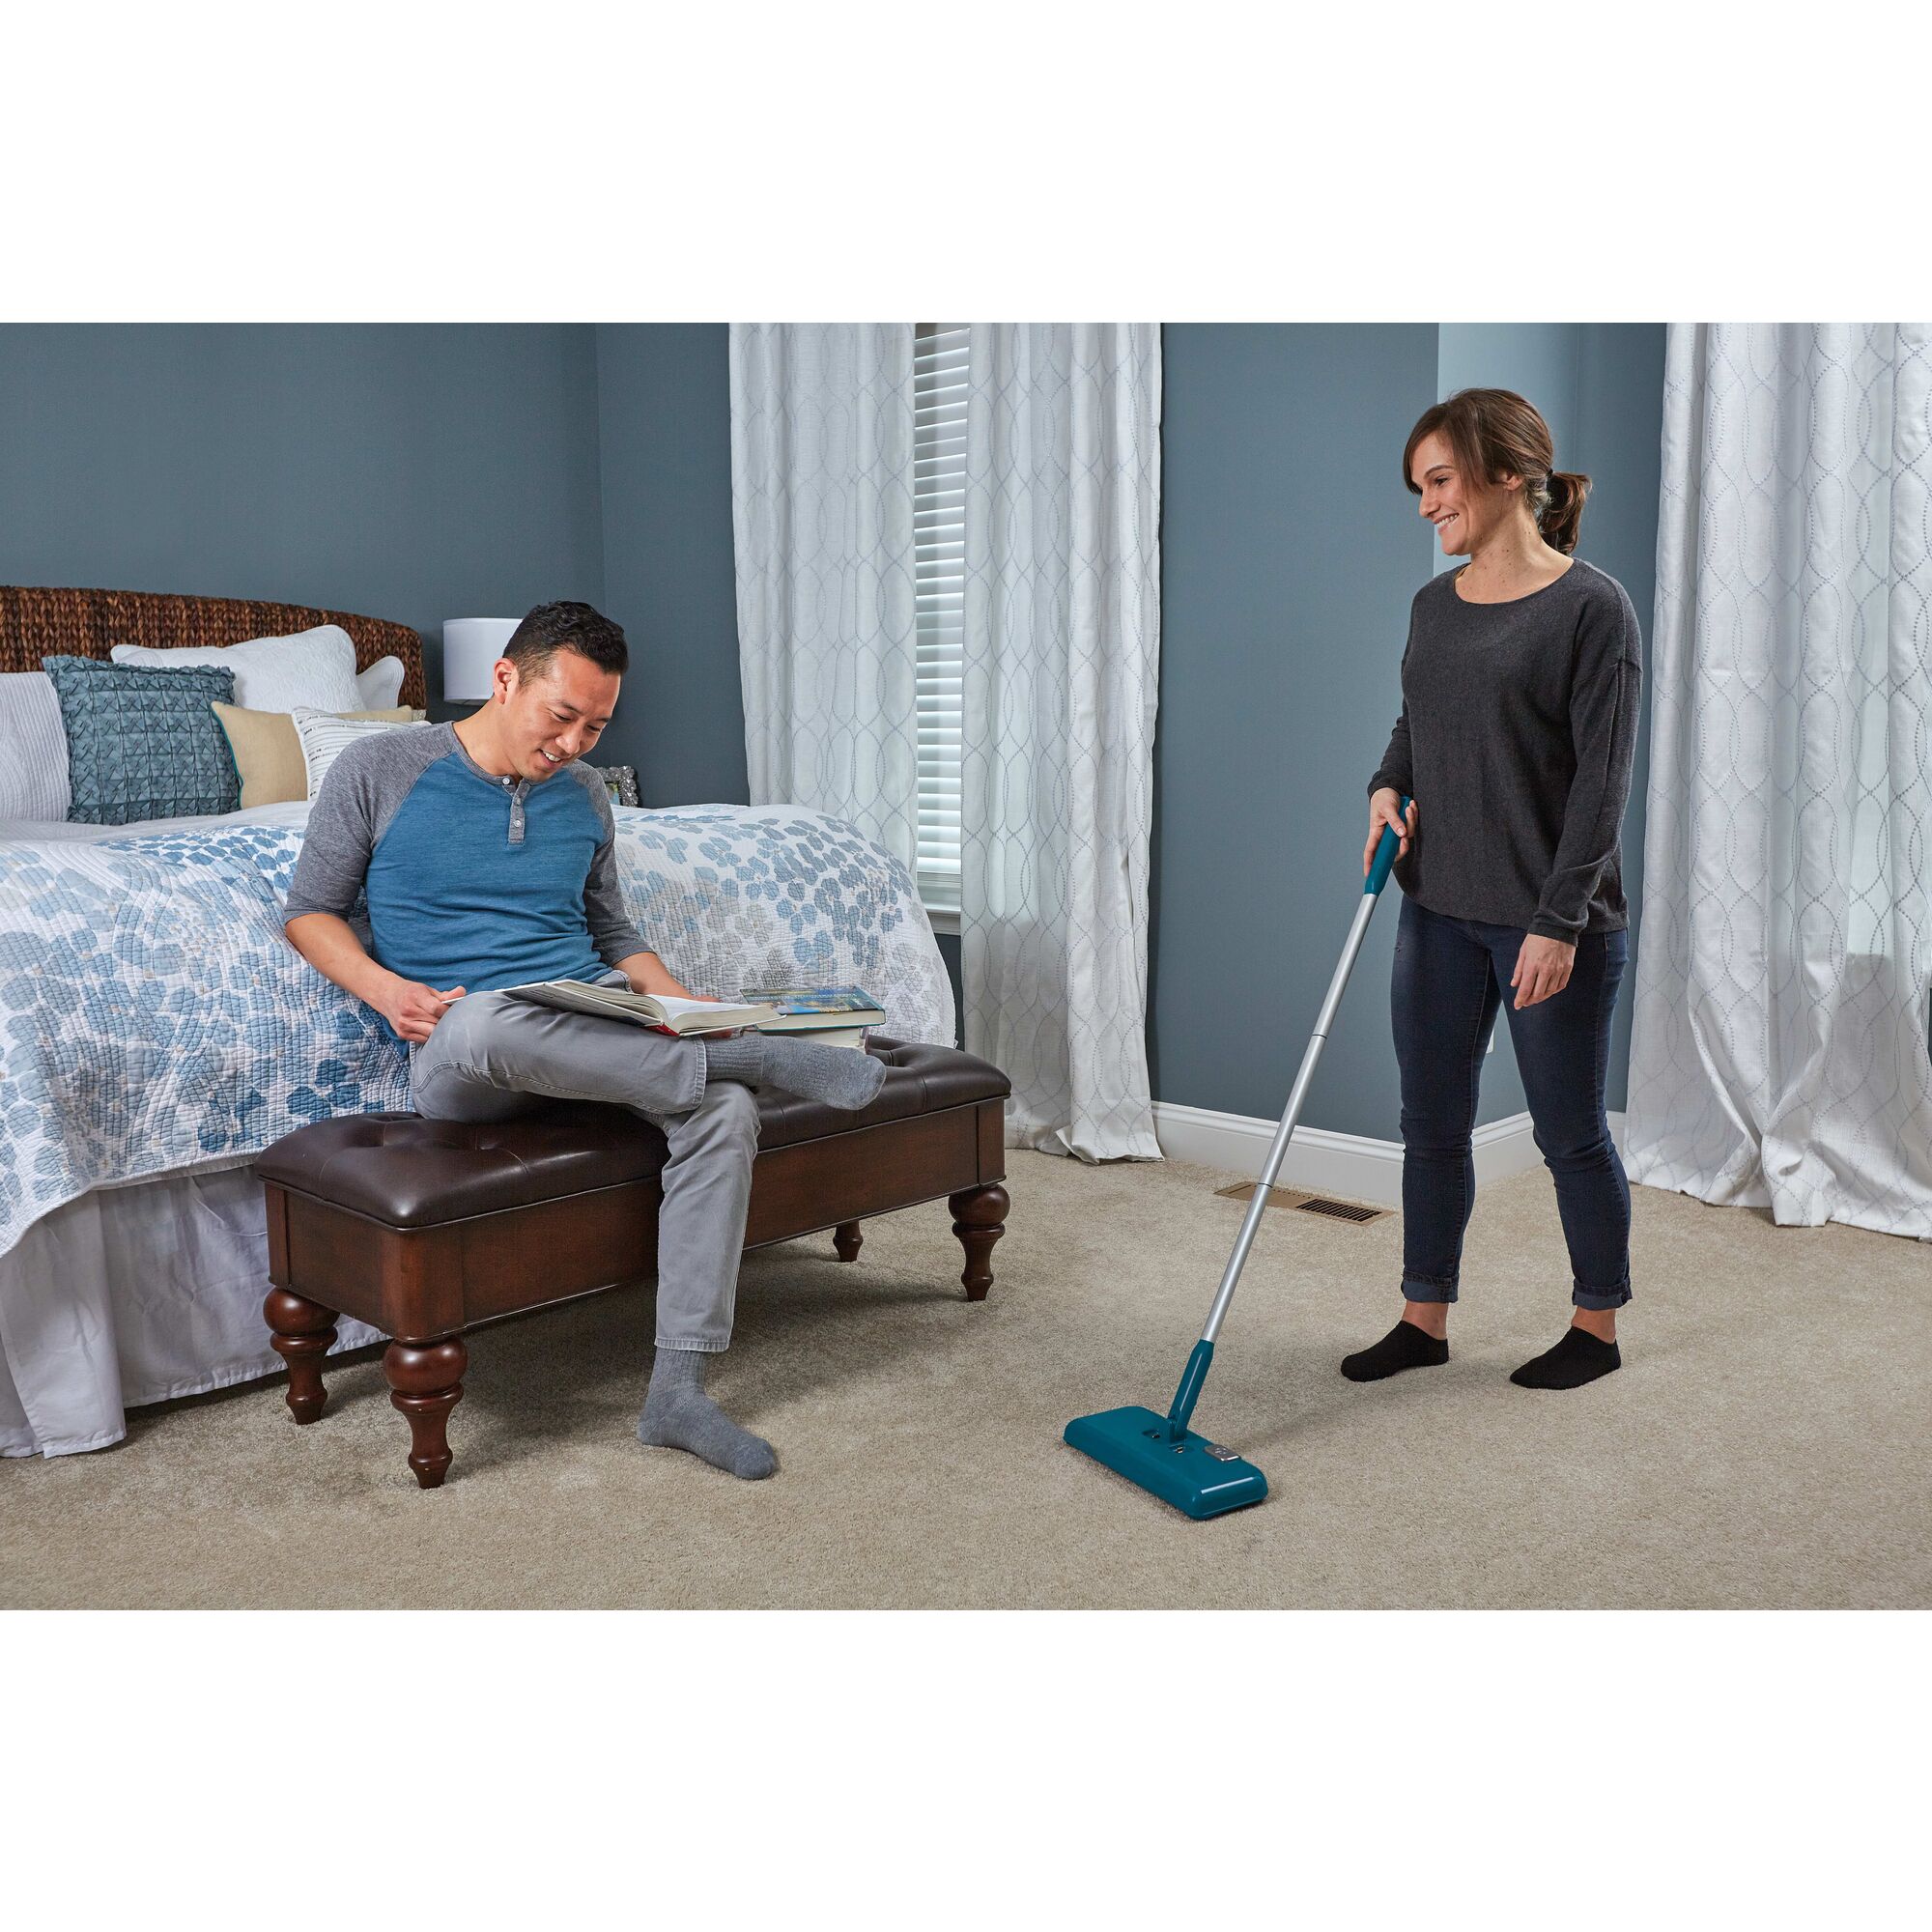 Powered Floor Sweeper being used by person to clean bedroom carpet.